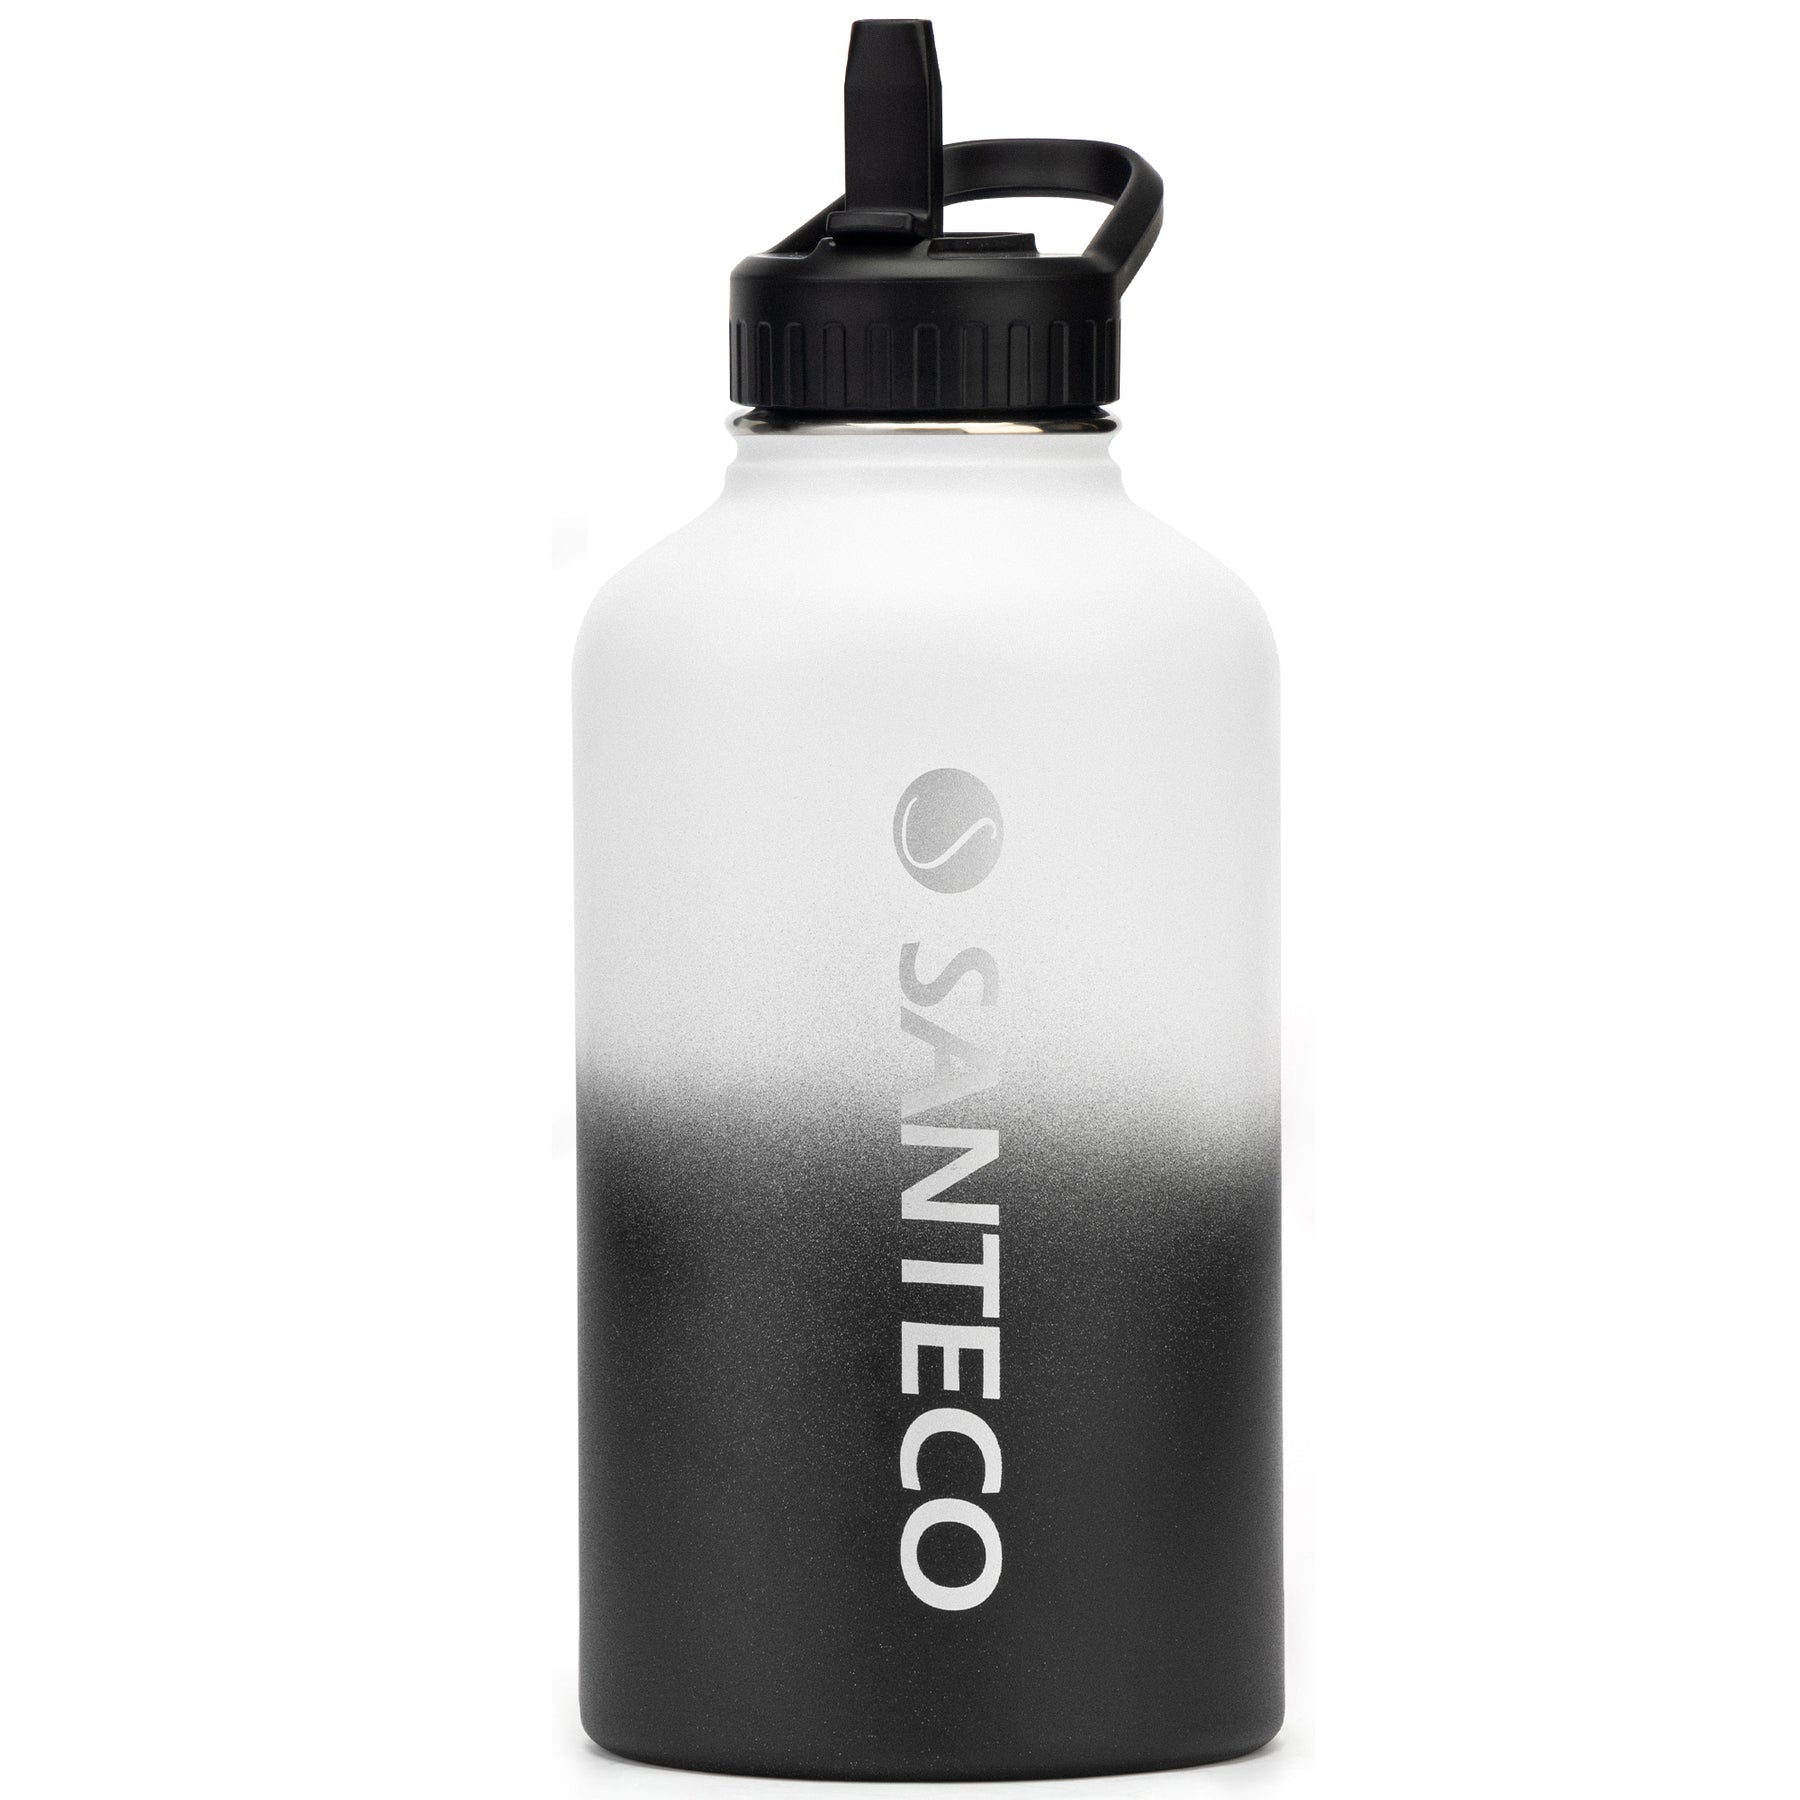 SANTECO water bottle 64 ounces (about 1.8 liters), half a gallon (about 1.8 liters) vacuum insulation stainless steel bottle, with straw handle cover, leak-proof, wide mouth and easy to clean, keep drinks hot and cold, suitable for gyms, camping, hiking